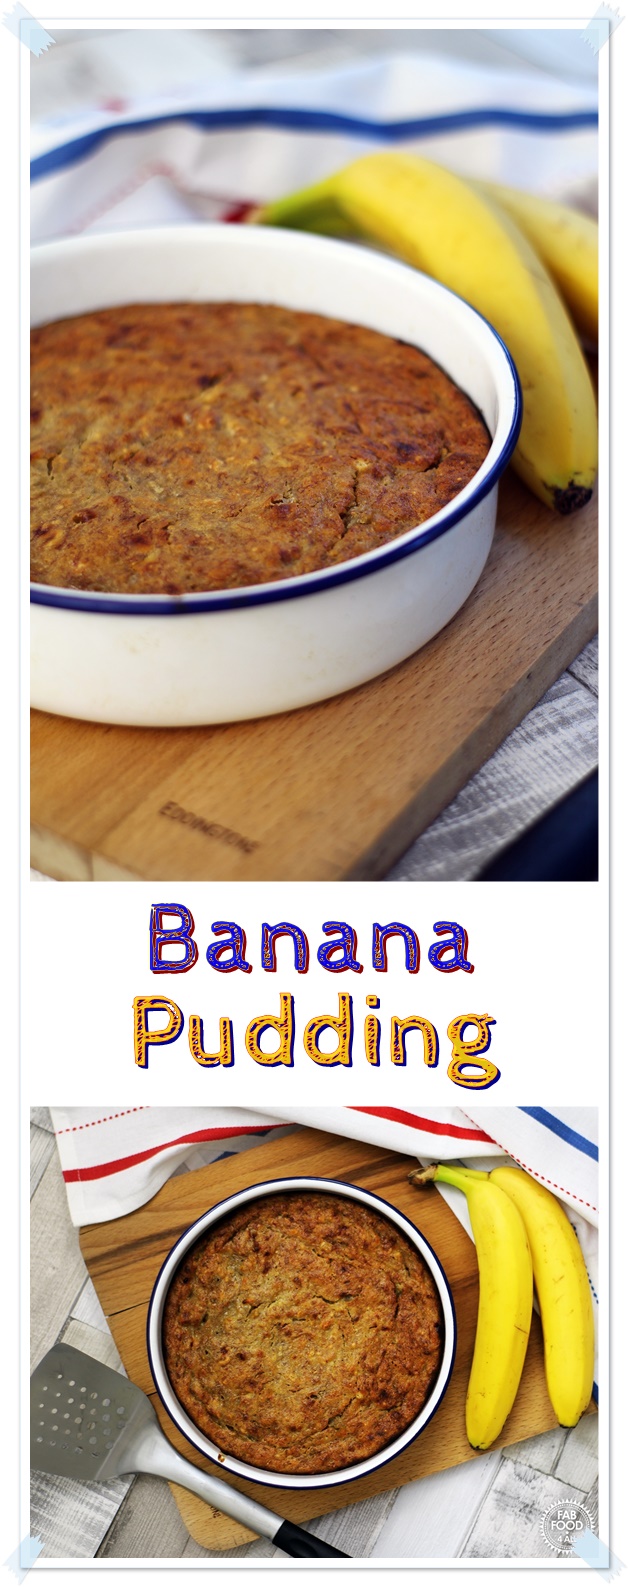 Banana Pudding - a great way to use up overripe bananas and a long time family favourite! Fab Food 4 All #banana #pudding #dessert #thrifty #foodwaste #frugal #vegetarian